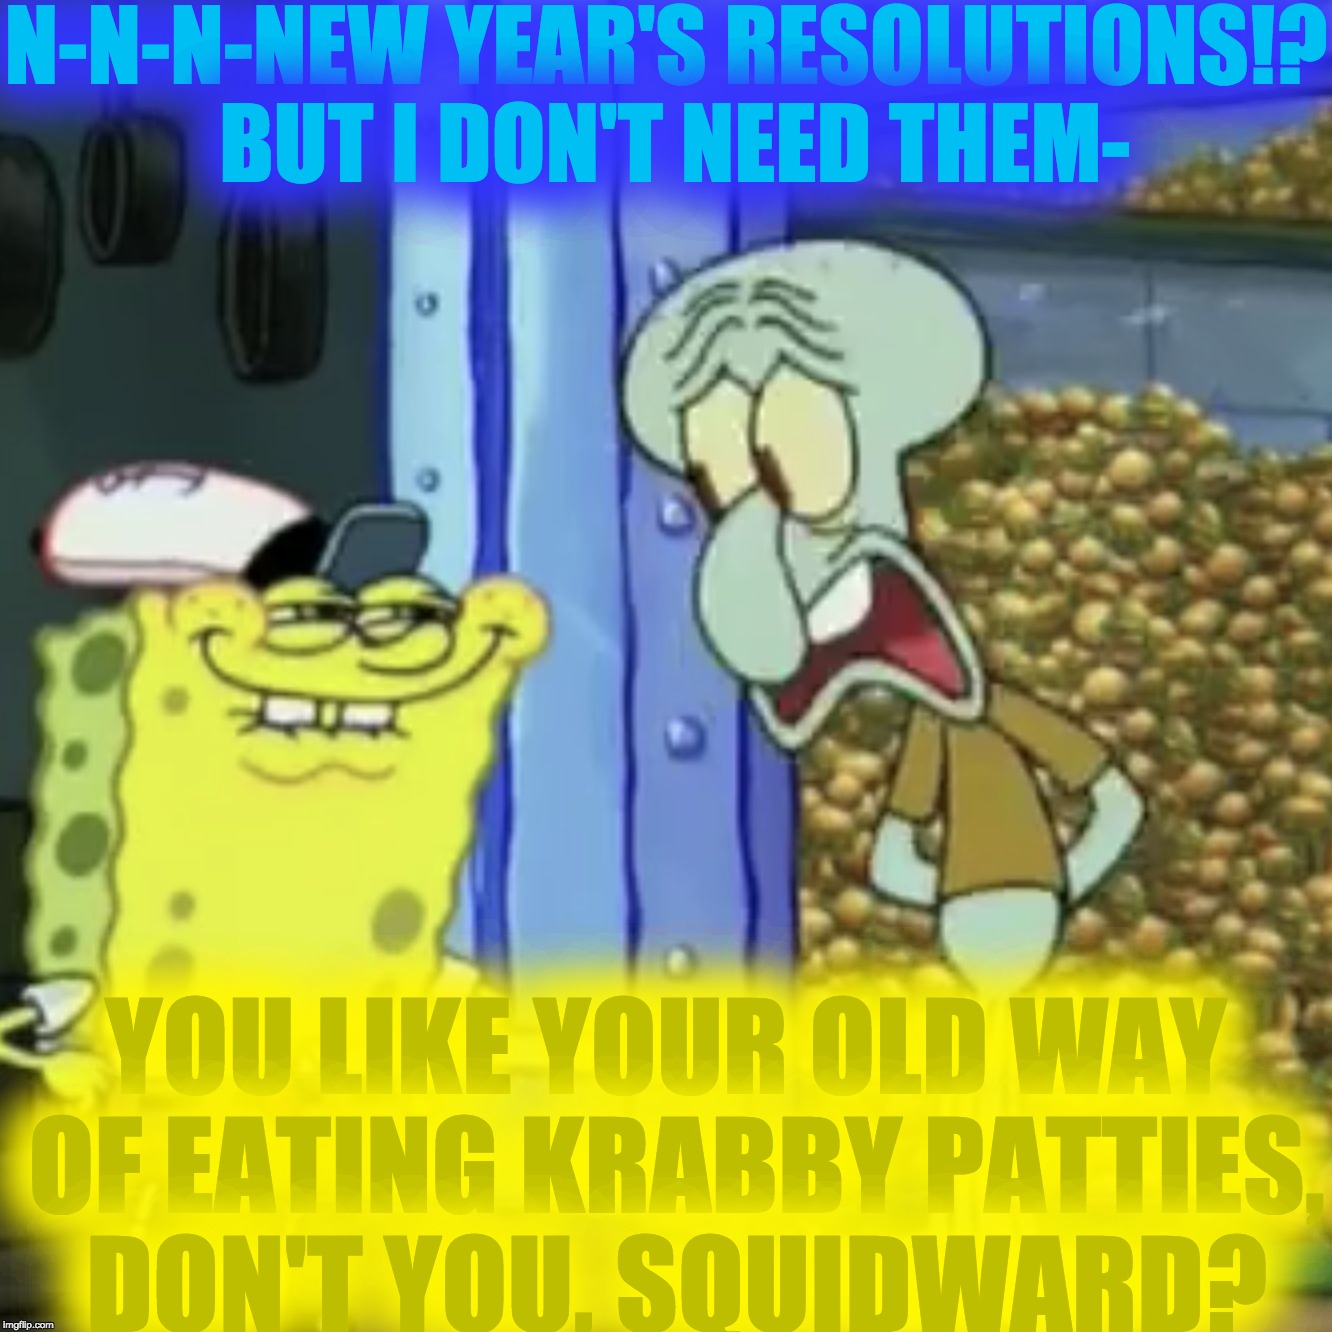 Don't You, Squidward? | N-N-N-NEW YEAR'S RESOLUTIONS!? BUT I DON'T NEED THEM-; YOU LIKE YOUR OLD WAY OF EATING KRABBY PATTIES, DON'T YOU, SQUIDWARD? | image tagged in don't you squidward? | made w/ Imgflip meme maker